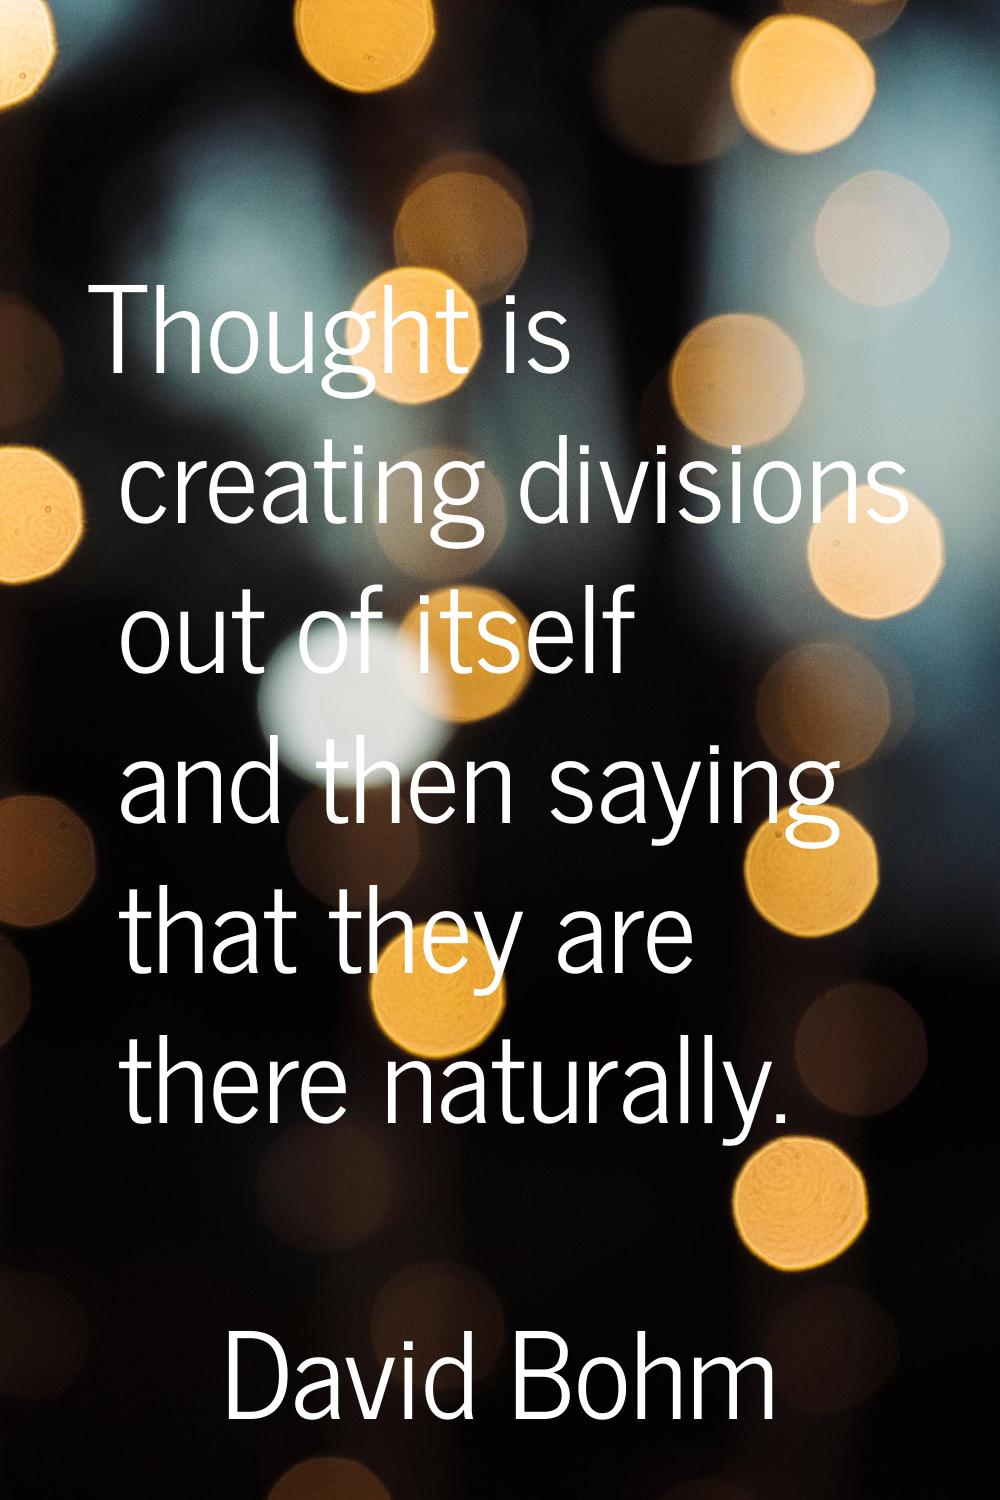 Thought is creating divisions out of itself and then saying that they are there naturally.